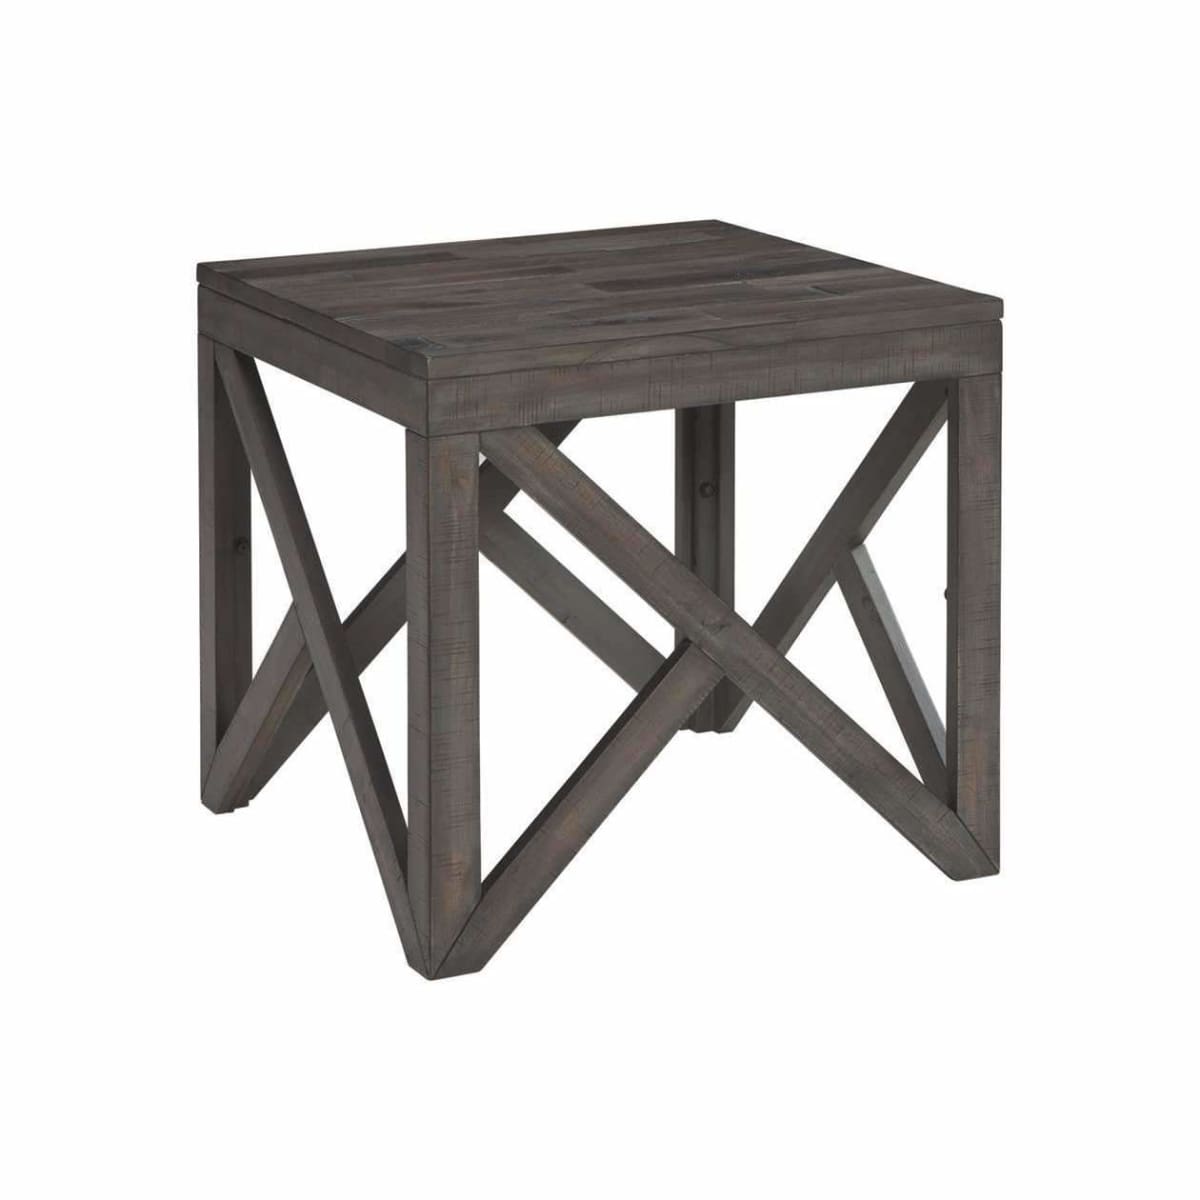 Haroflyn End Table - END TABLE/SIDE TABLE